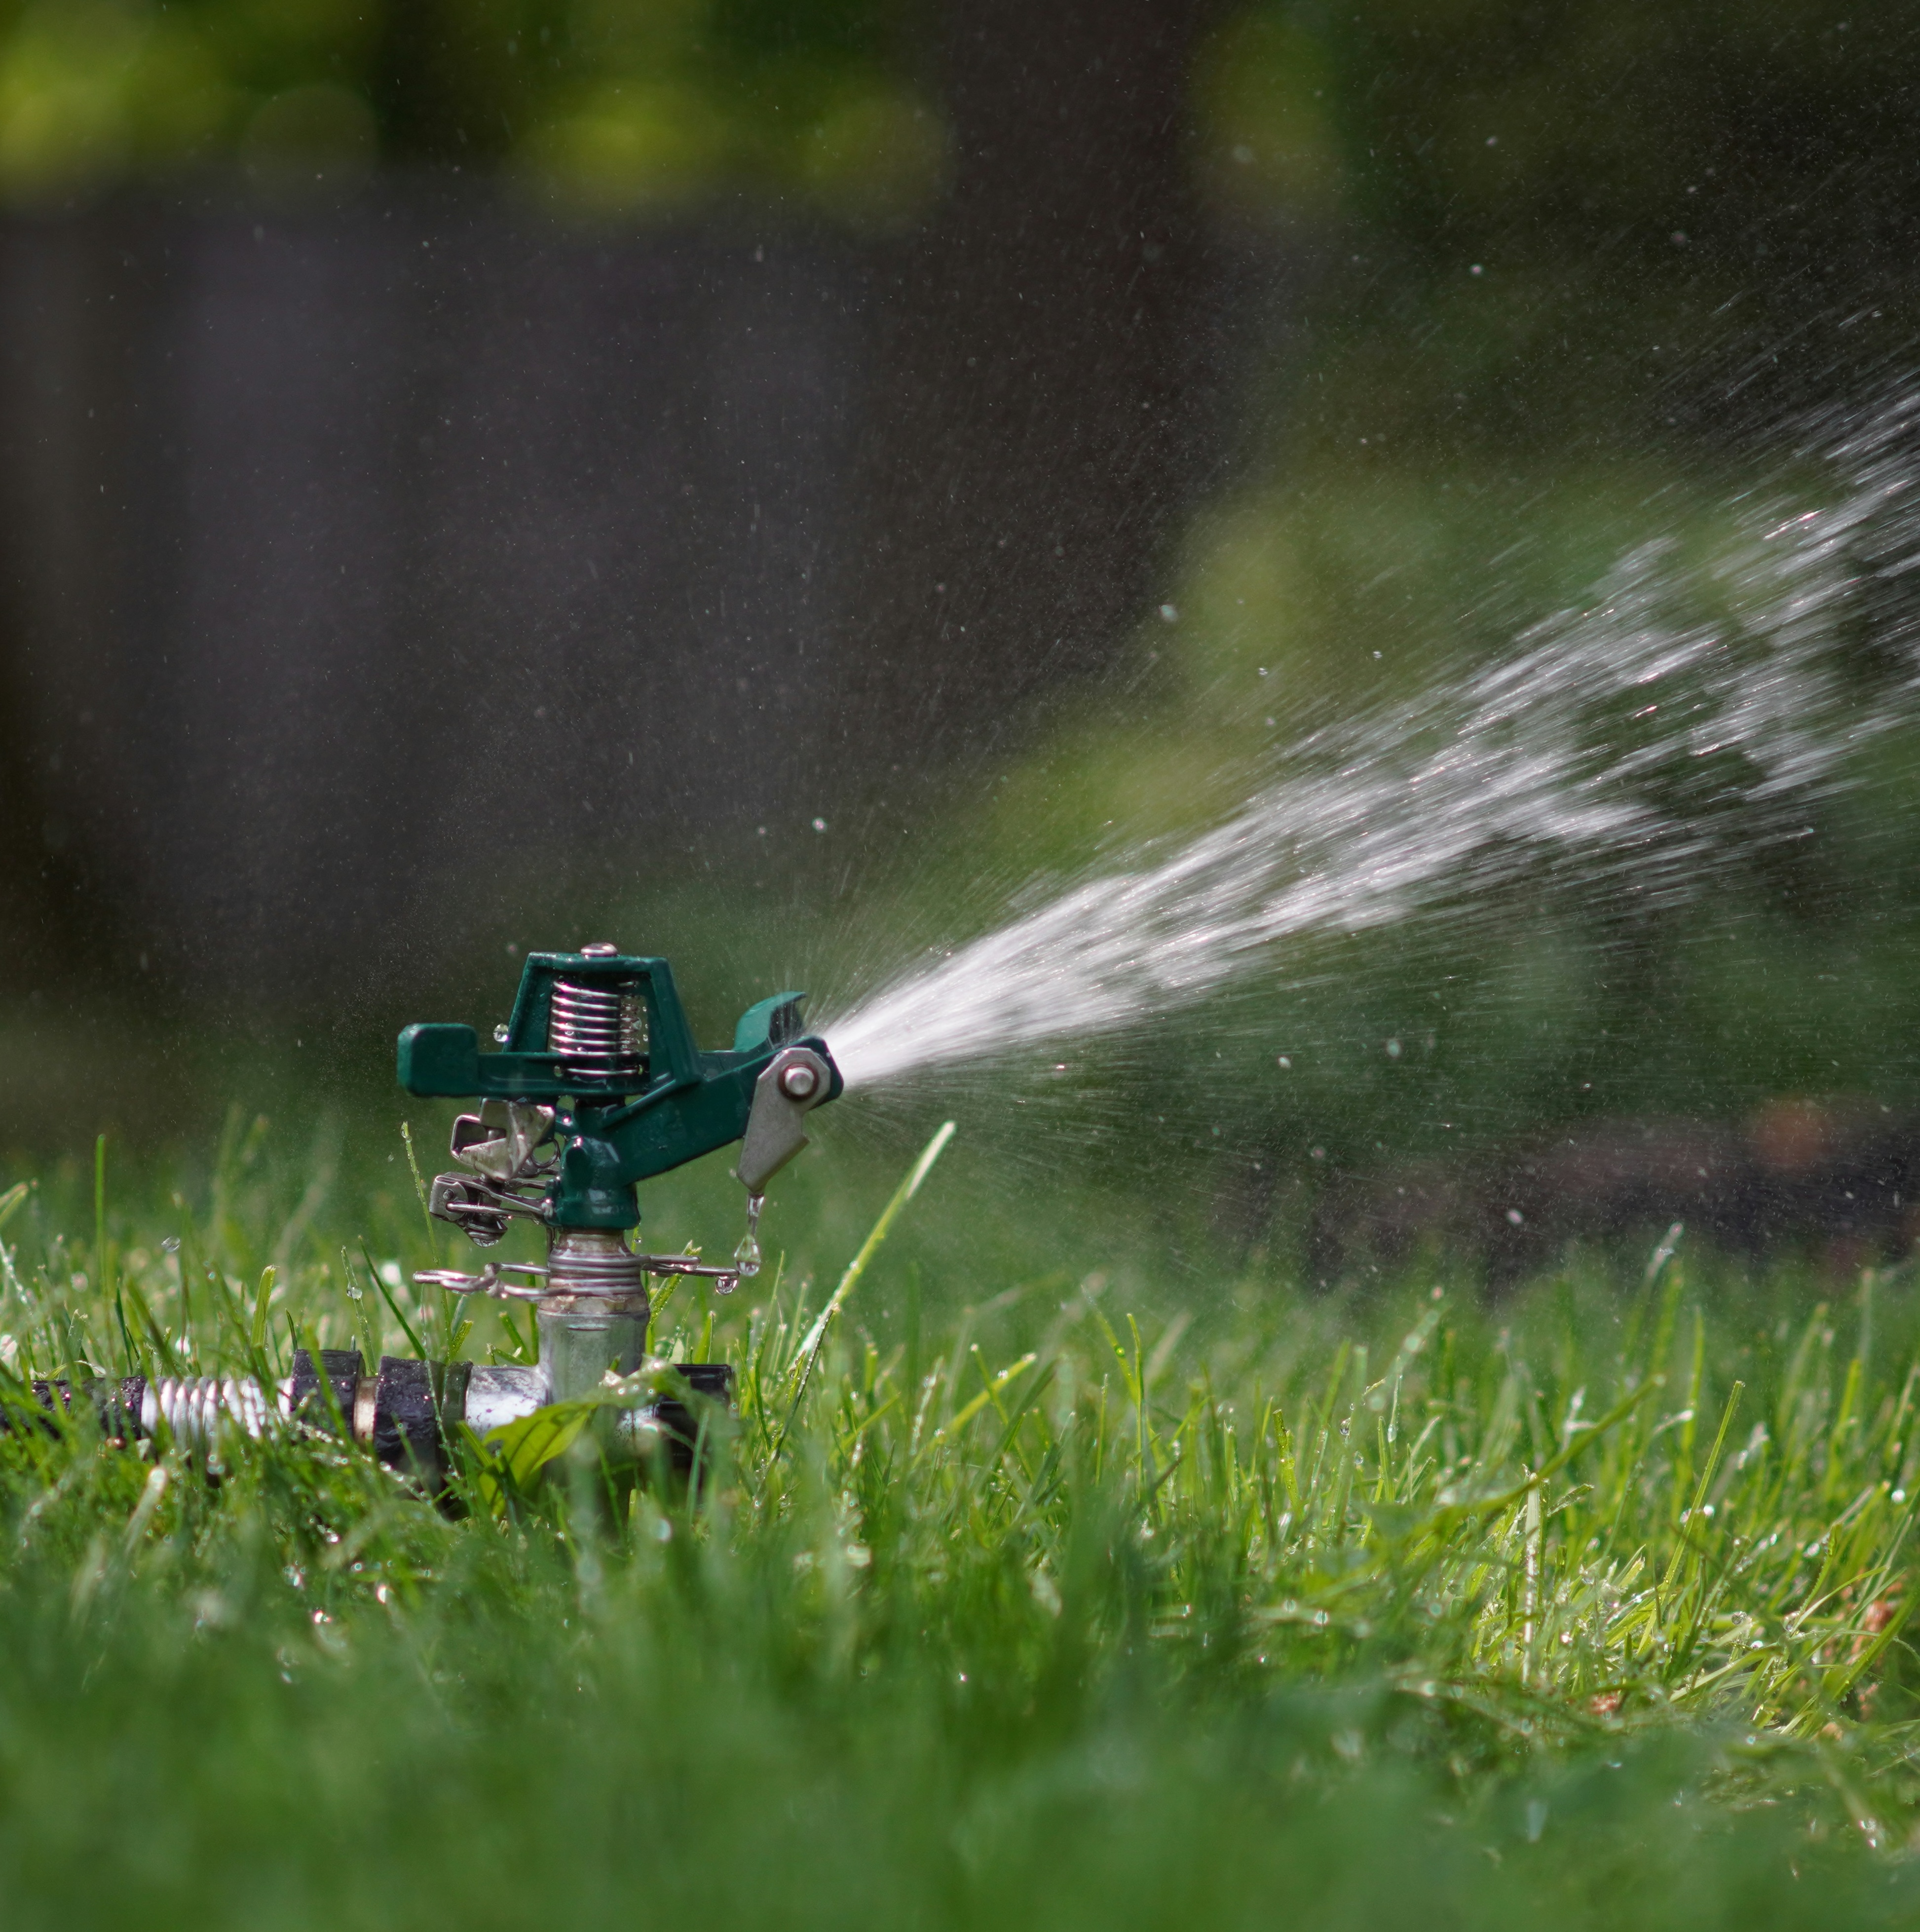 Photo of a sprinkler in grass, by Paul Moody on Unsplash.com